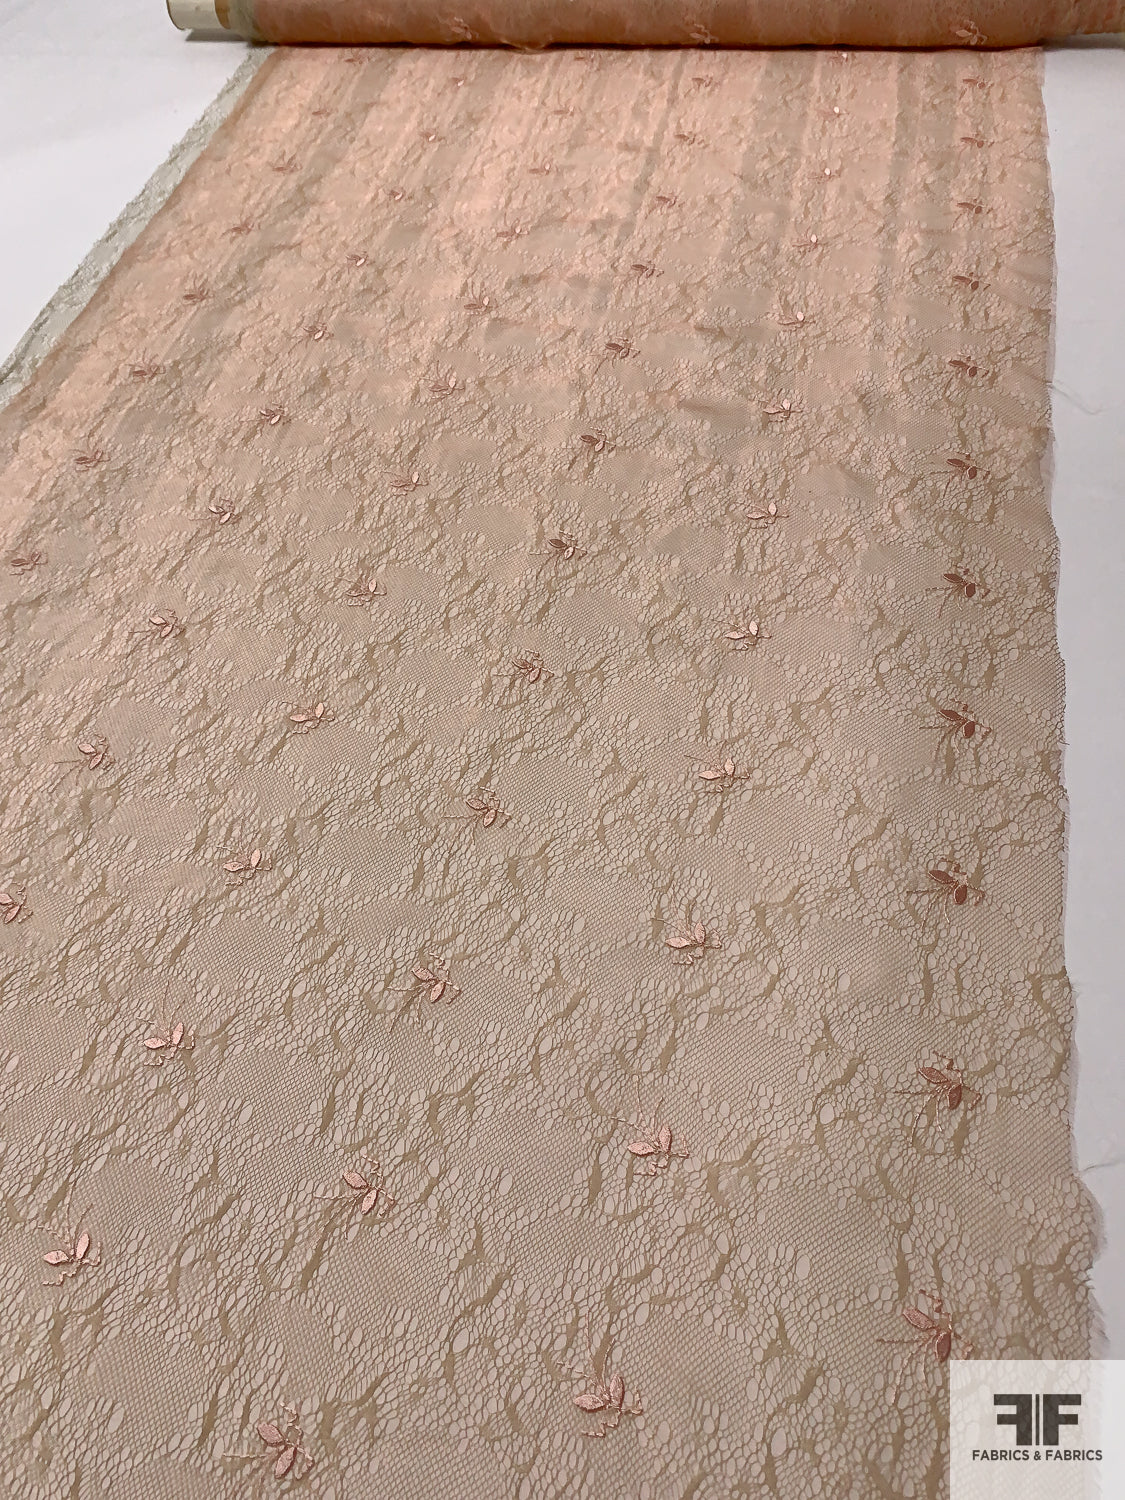 Embroidered Metallic Organza with Stitched on Lace - Rose Gold / Beige